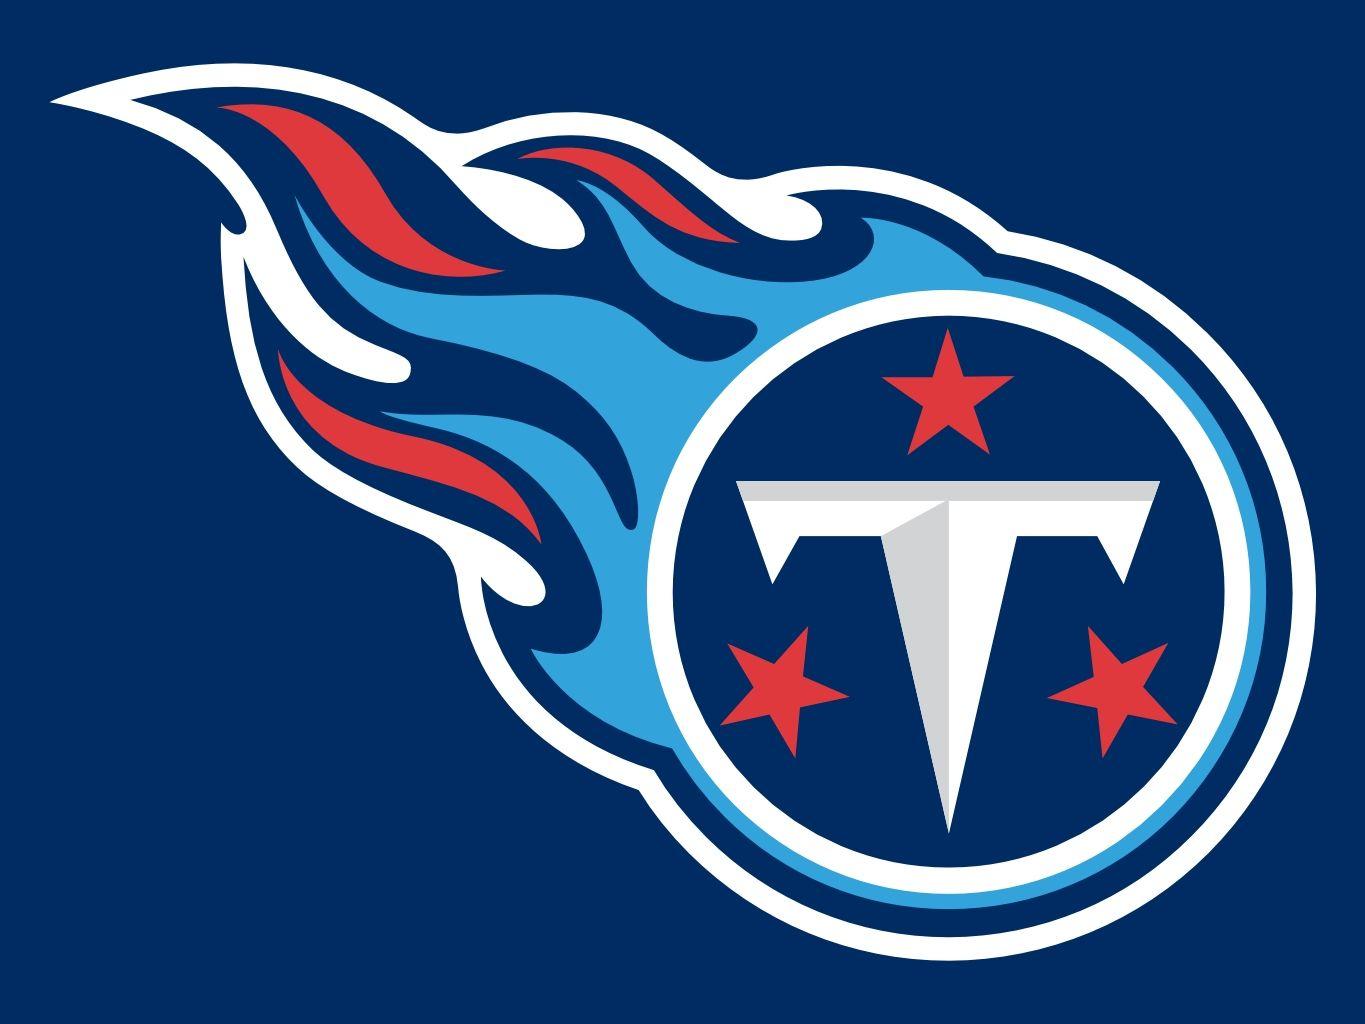 Tennessee Titans Logo - Tennessee Titans Logo 4 Physical Therapy. Tennessee